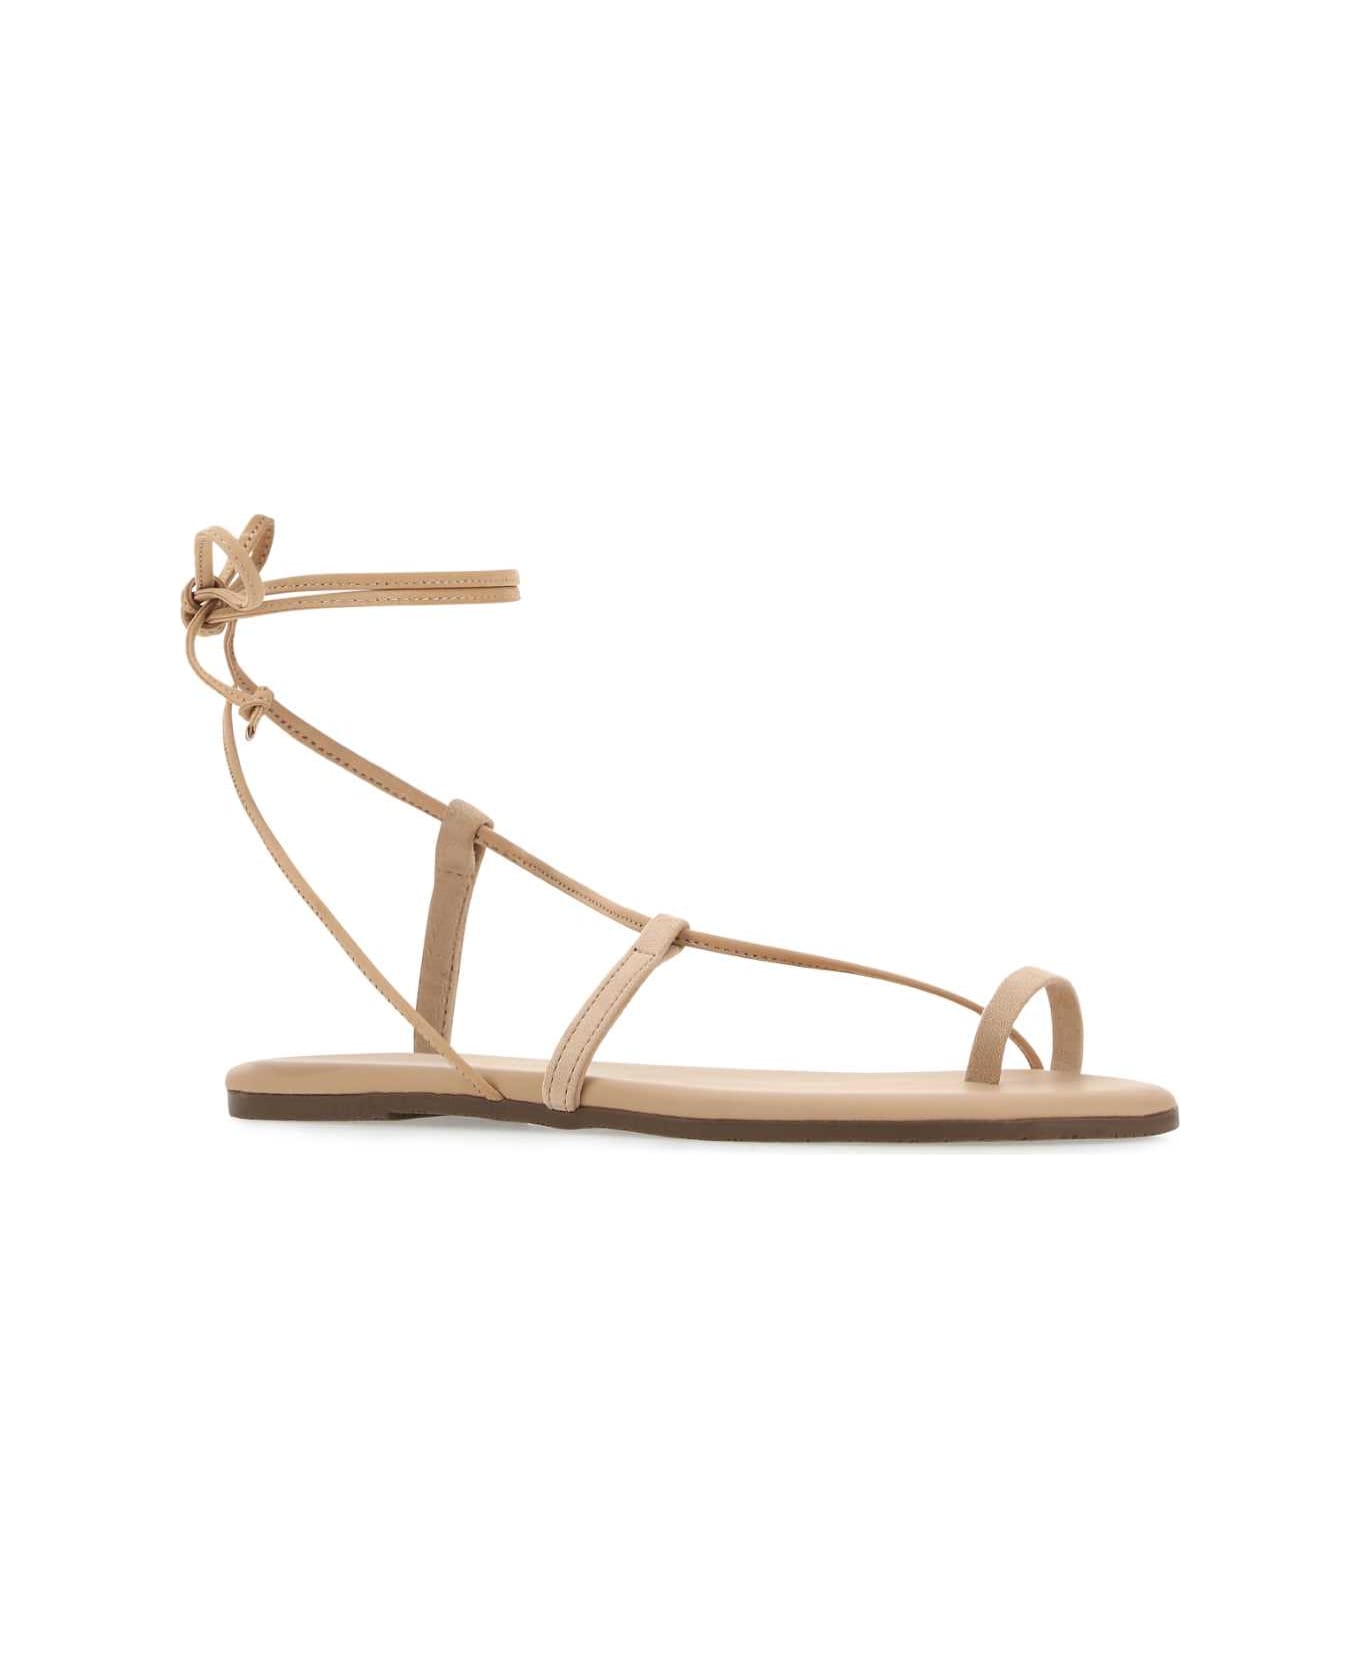 Tkees Skin Pink Suede Jo Sandals - PURDY